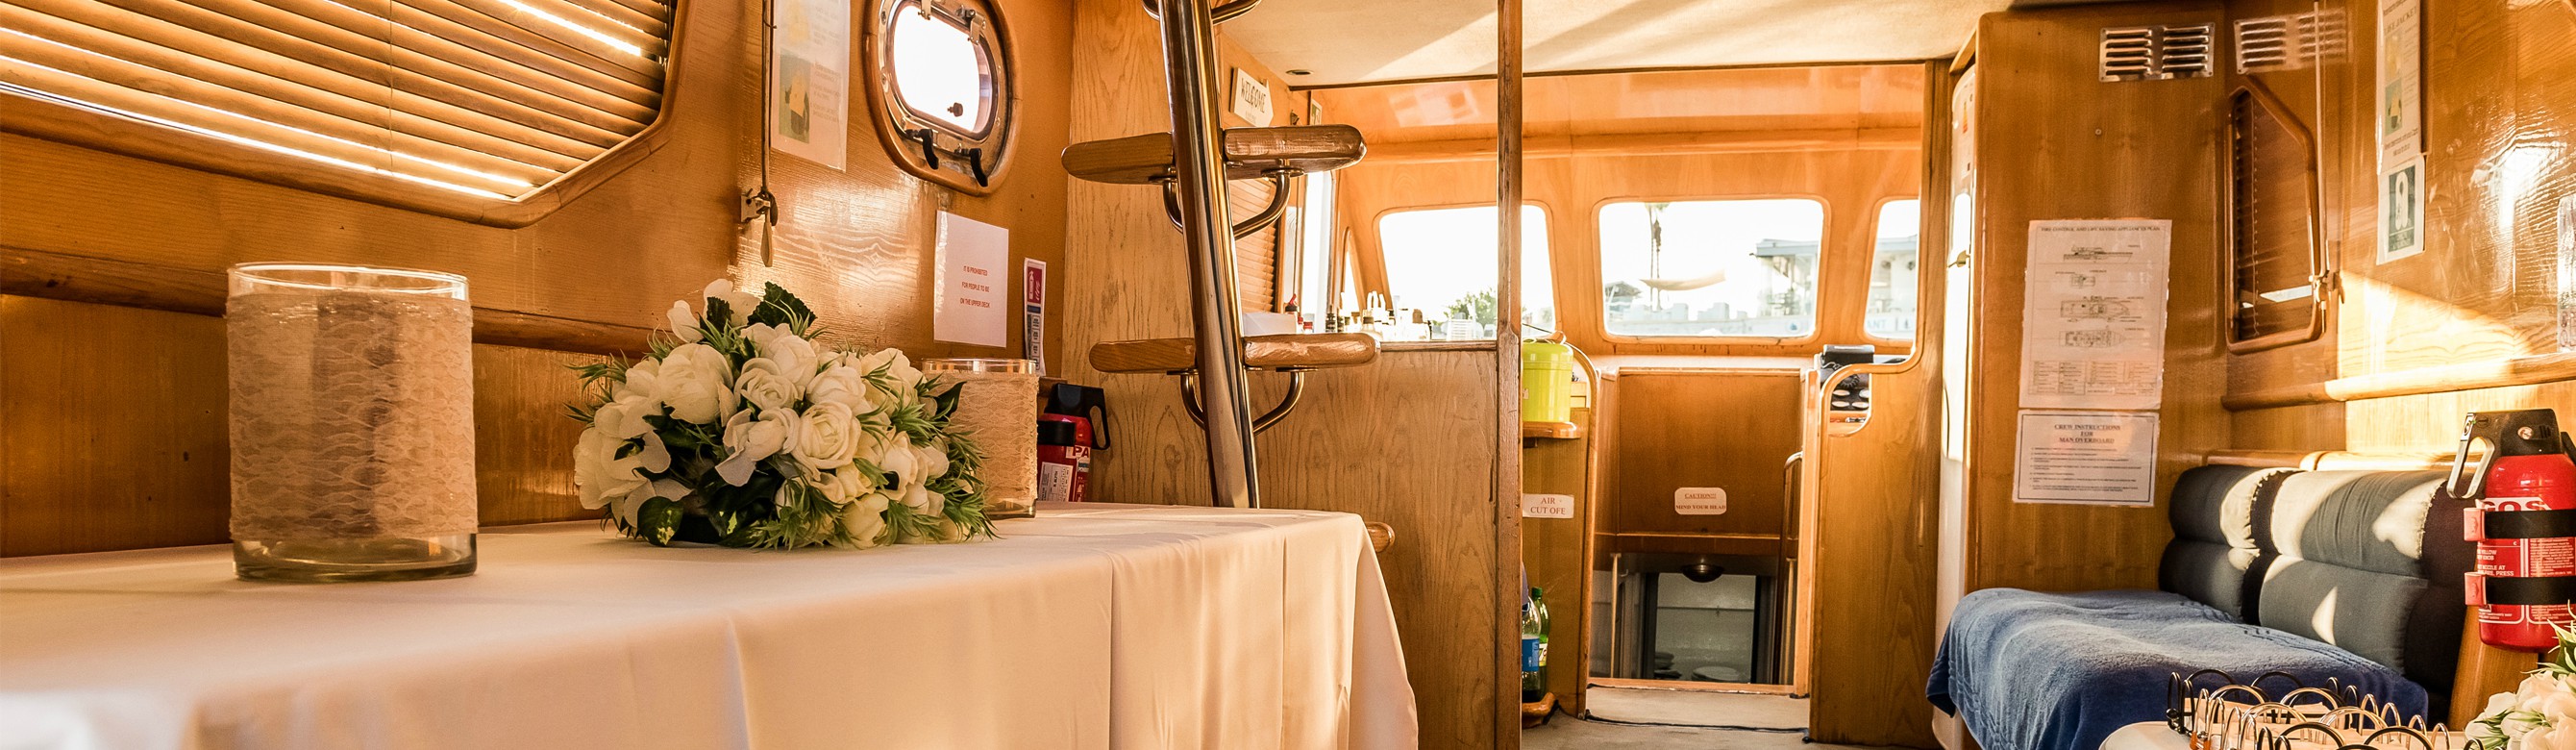 Book your wedding day in An Exclusive, Intimate Yacht Wedding Kurosivo IV - Paphos